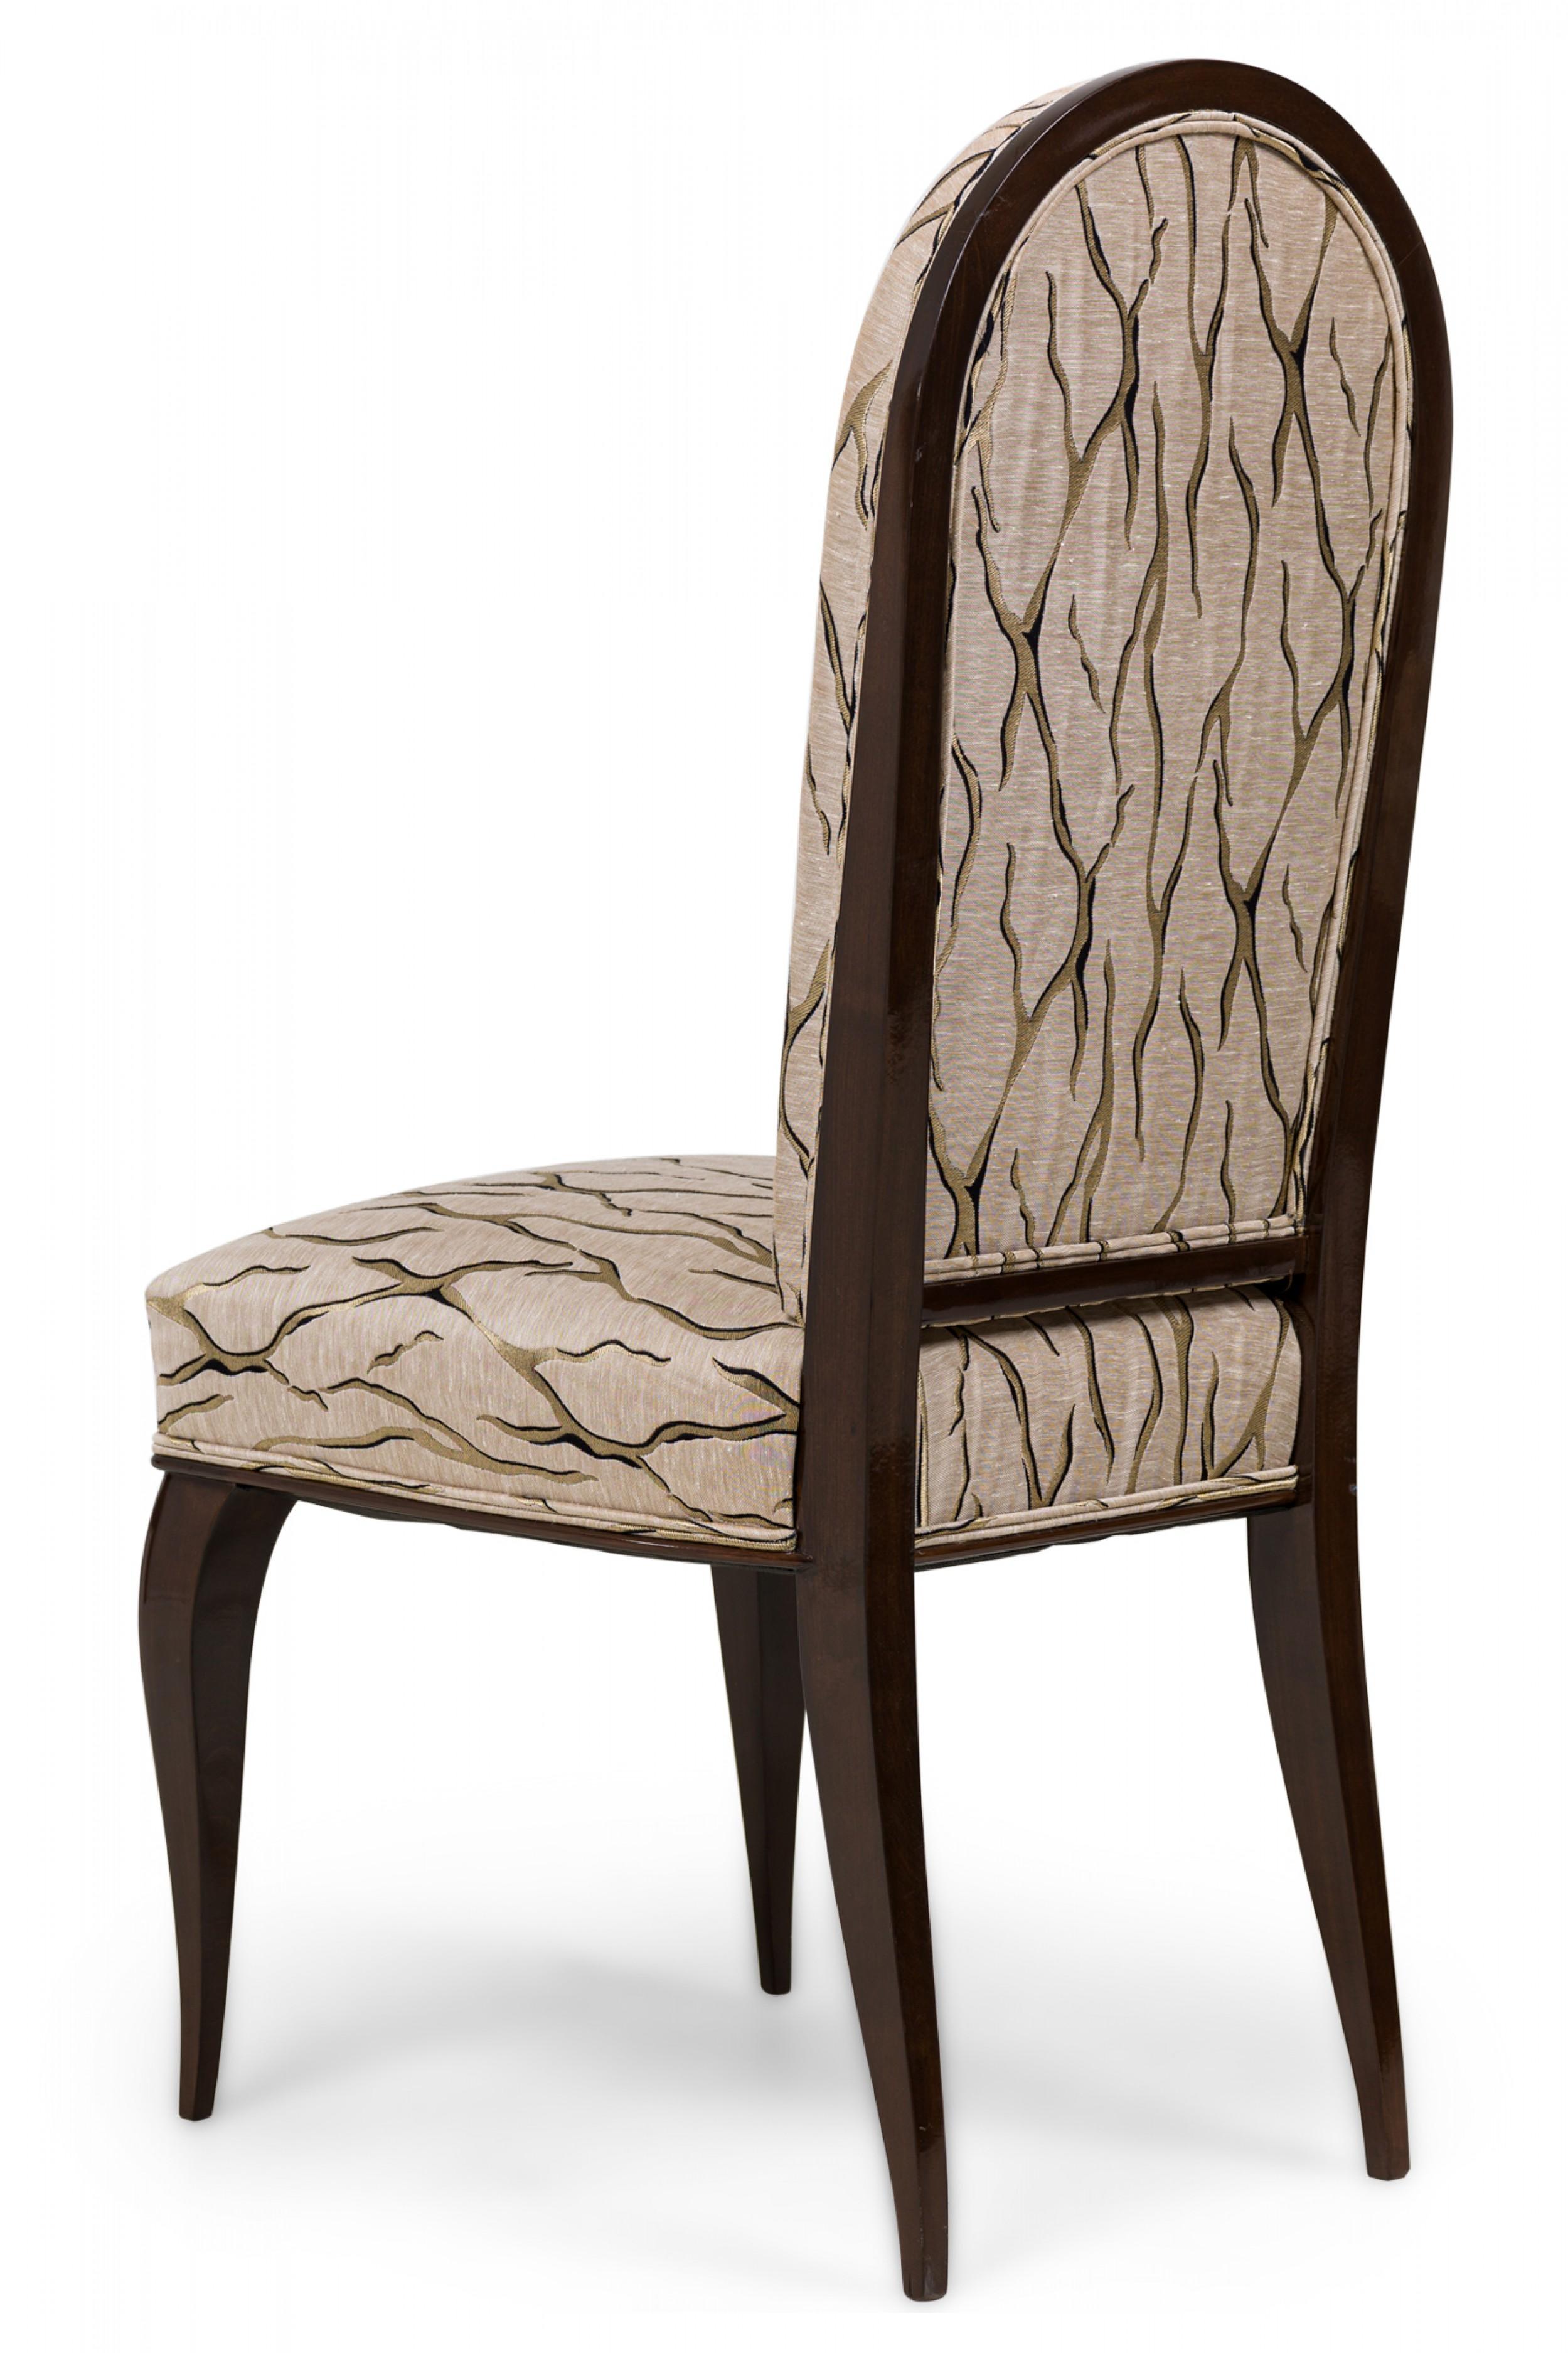 Wood Dominique et Cie French Art Deco Mahogany Beige & Gold Upholstered Dining Chairs For Sale